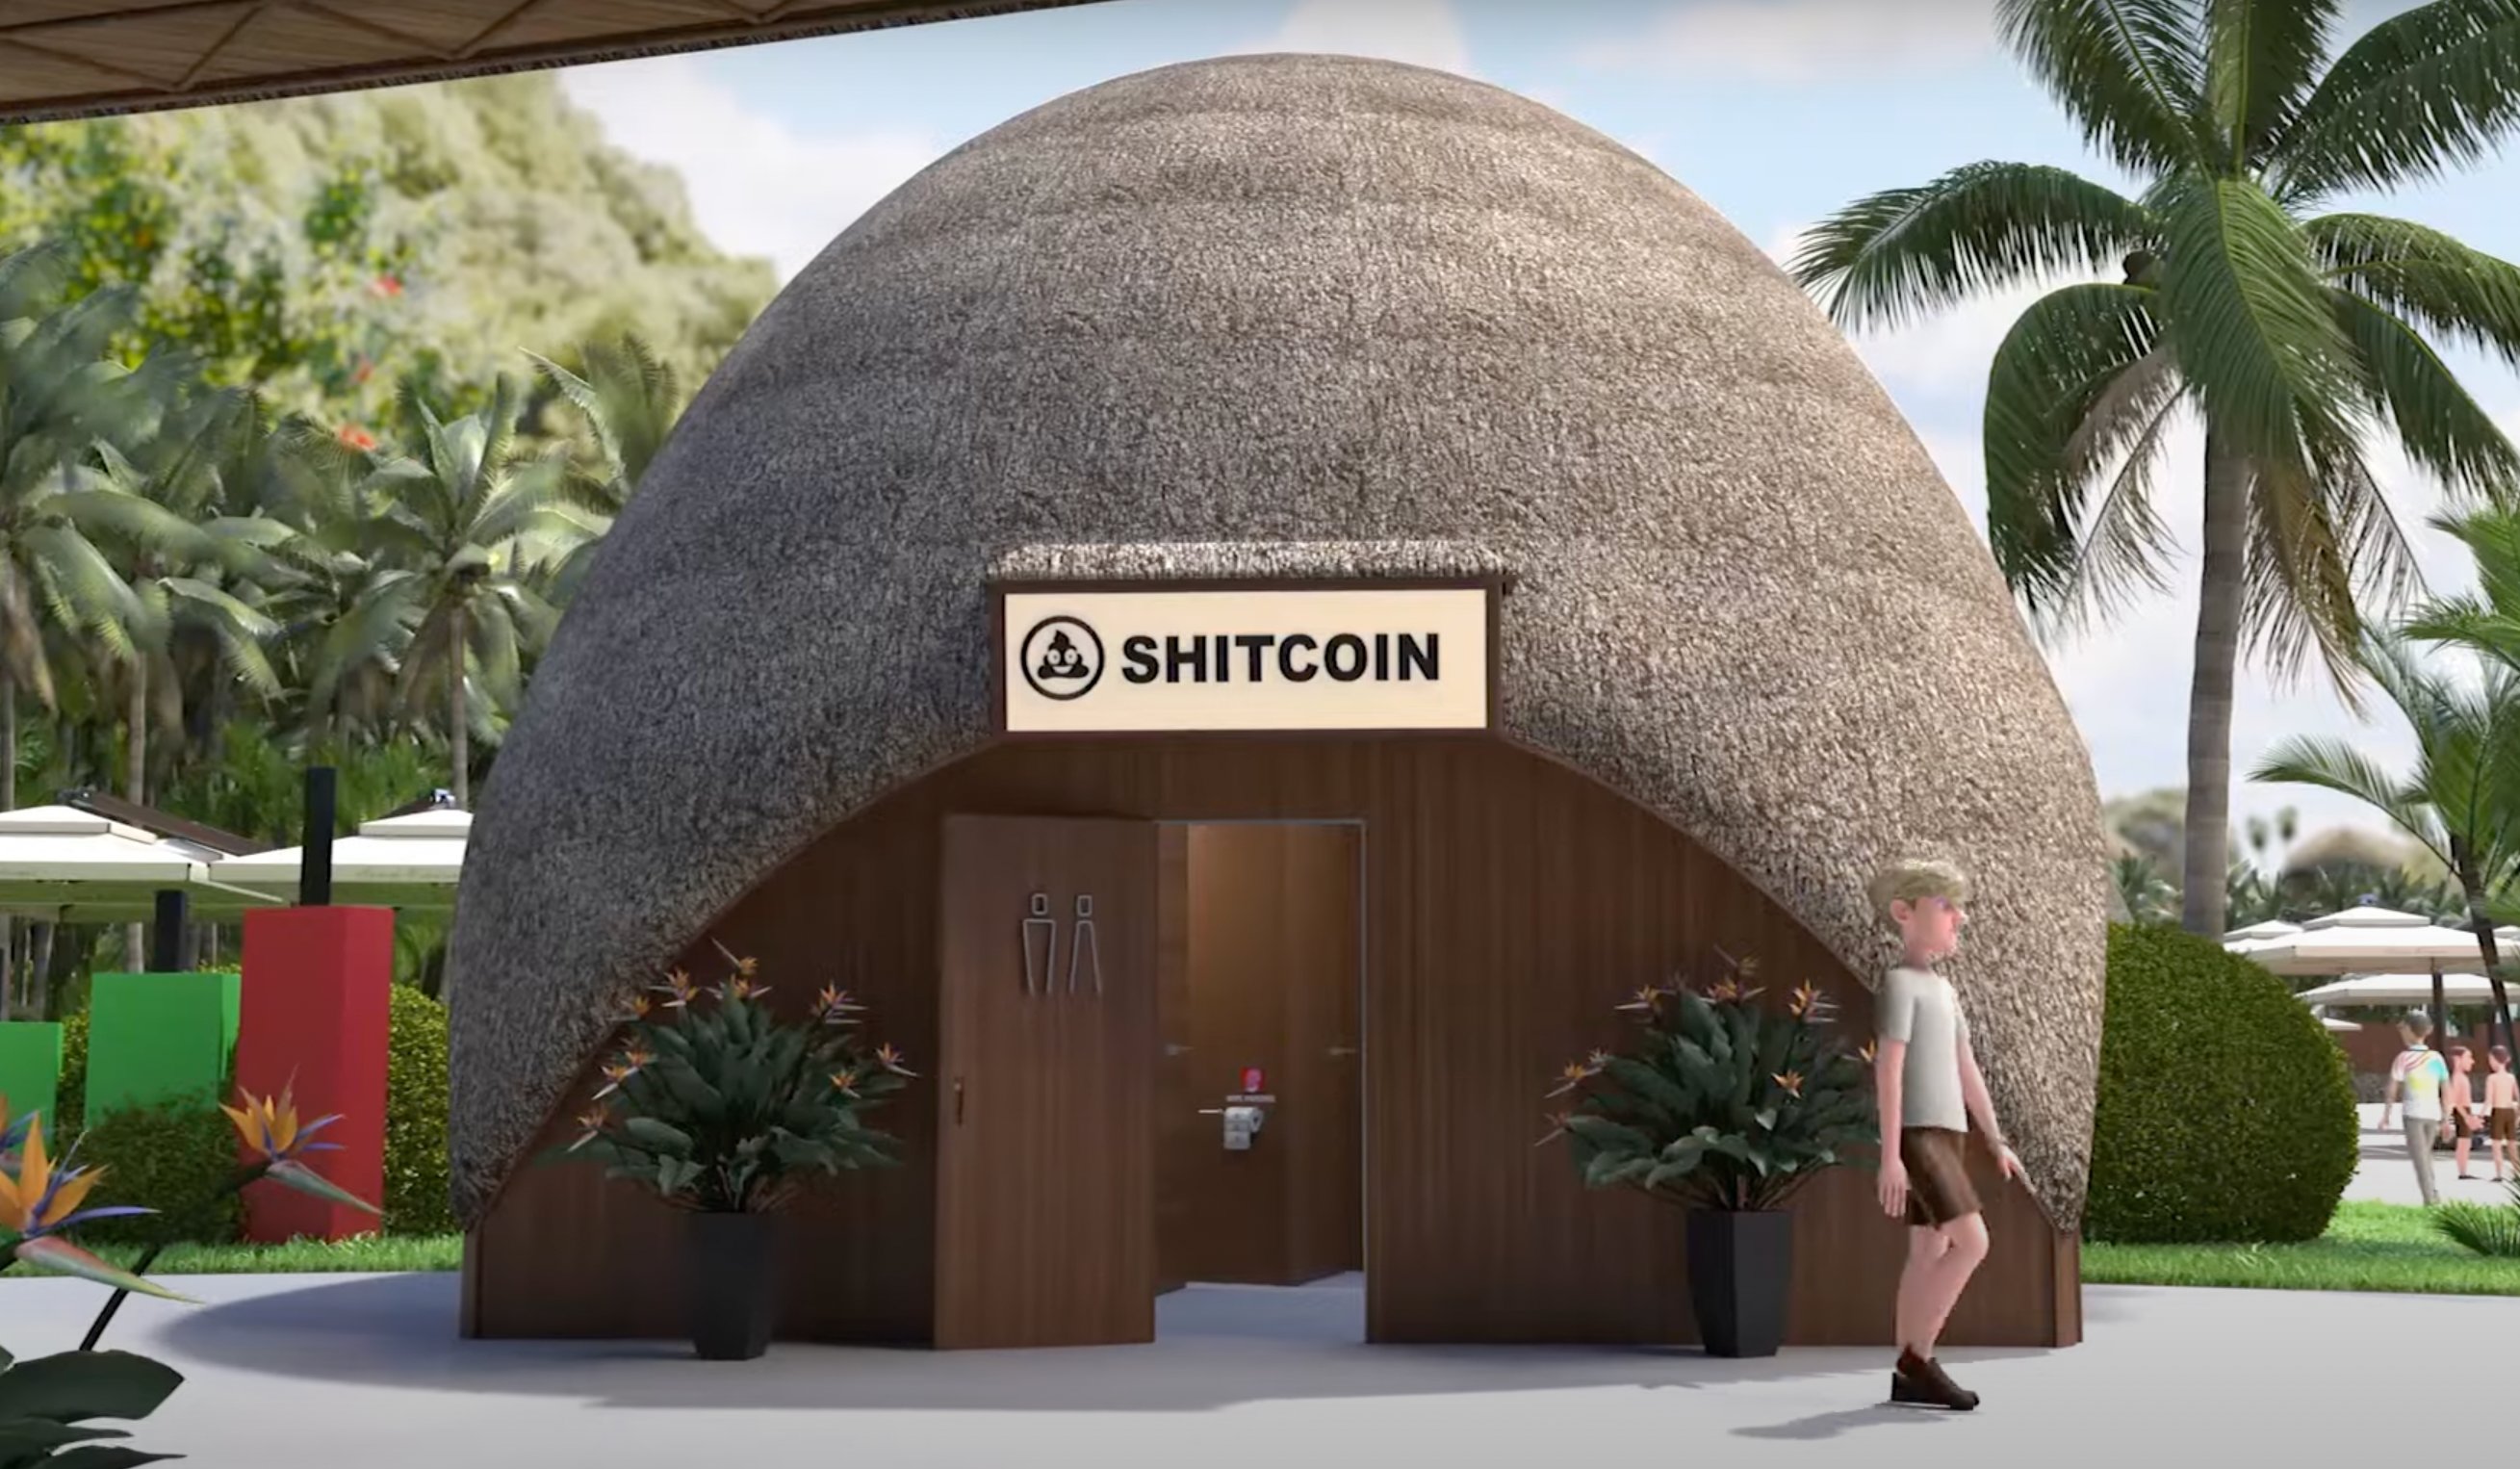 A hut with a rounded top and a door with toilet symbols on it has the sign over the entrance saying 'Shitcoin'